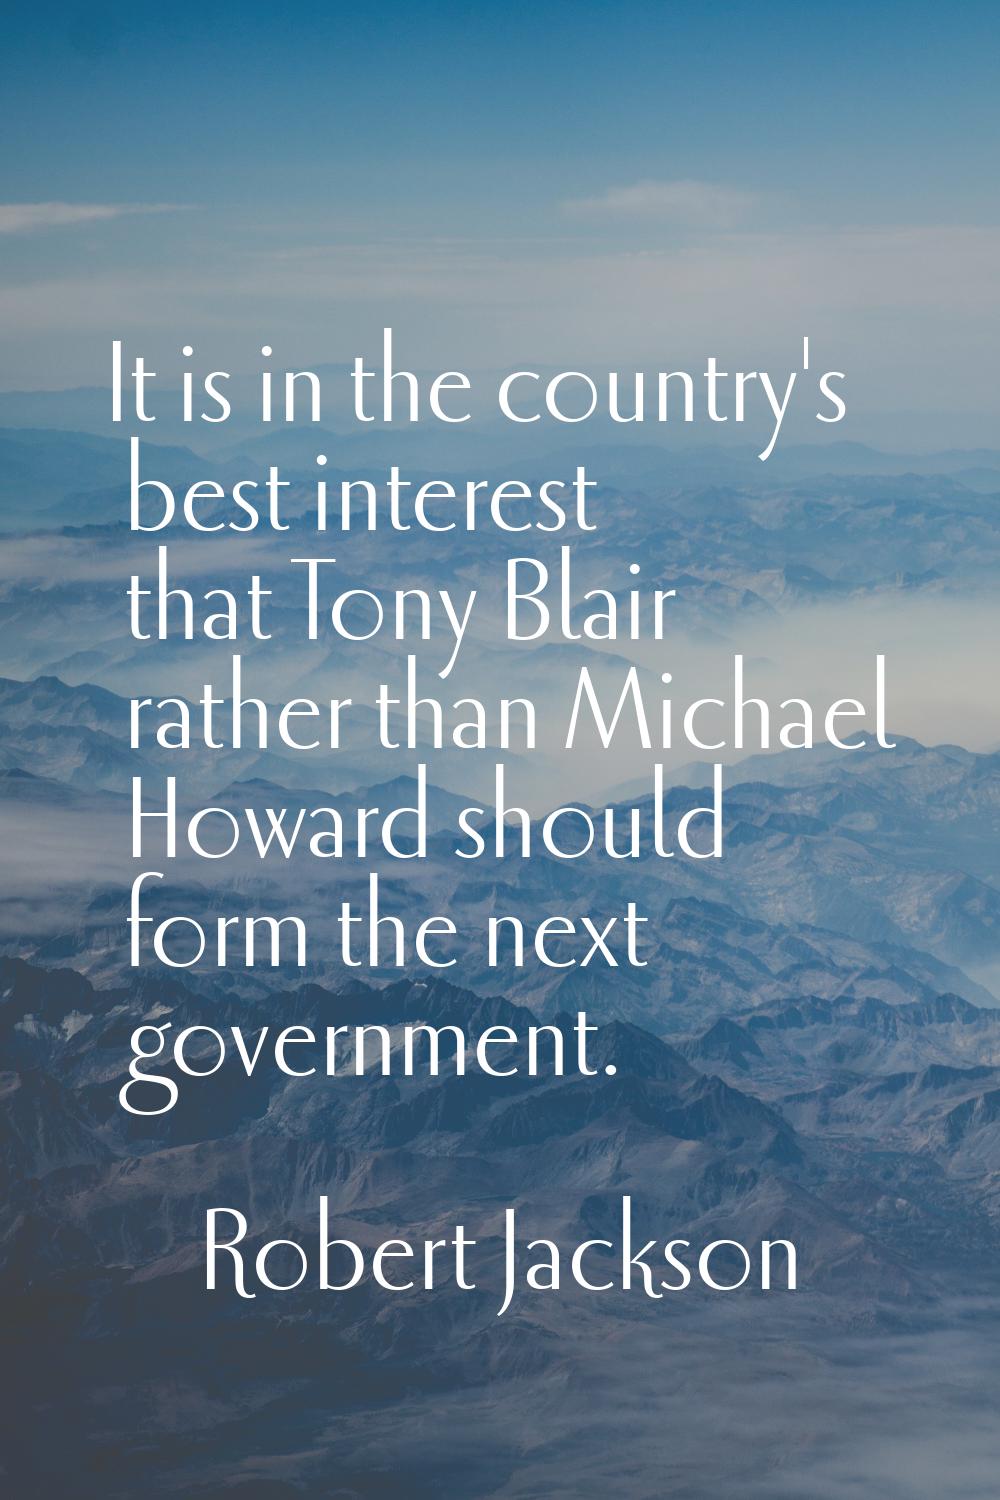 It is in the country's best interest that Tony Blair rather than Michael Howard should form the nex